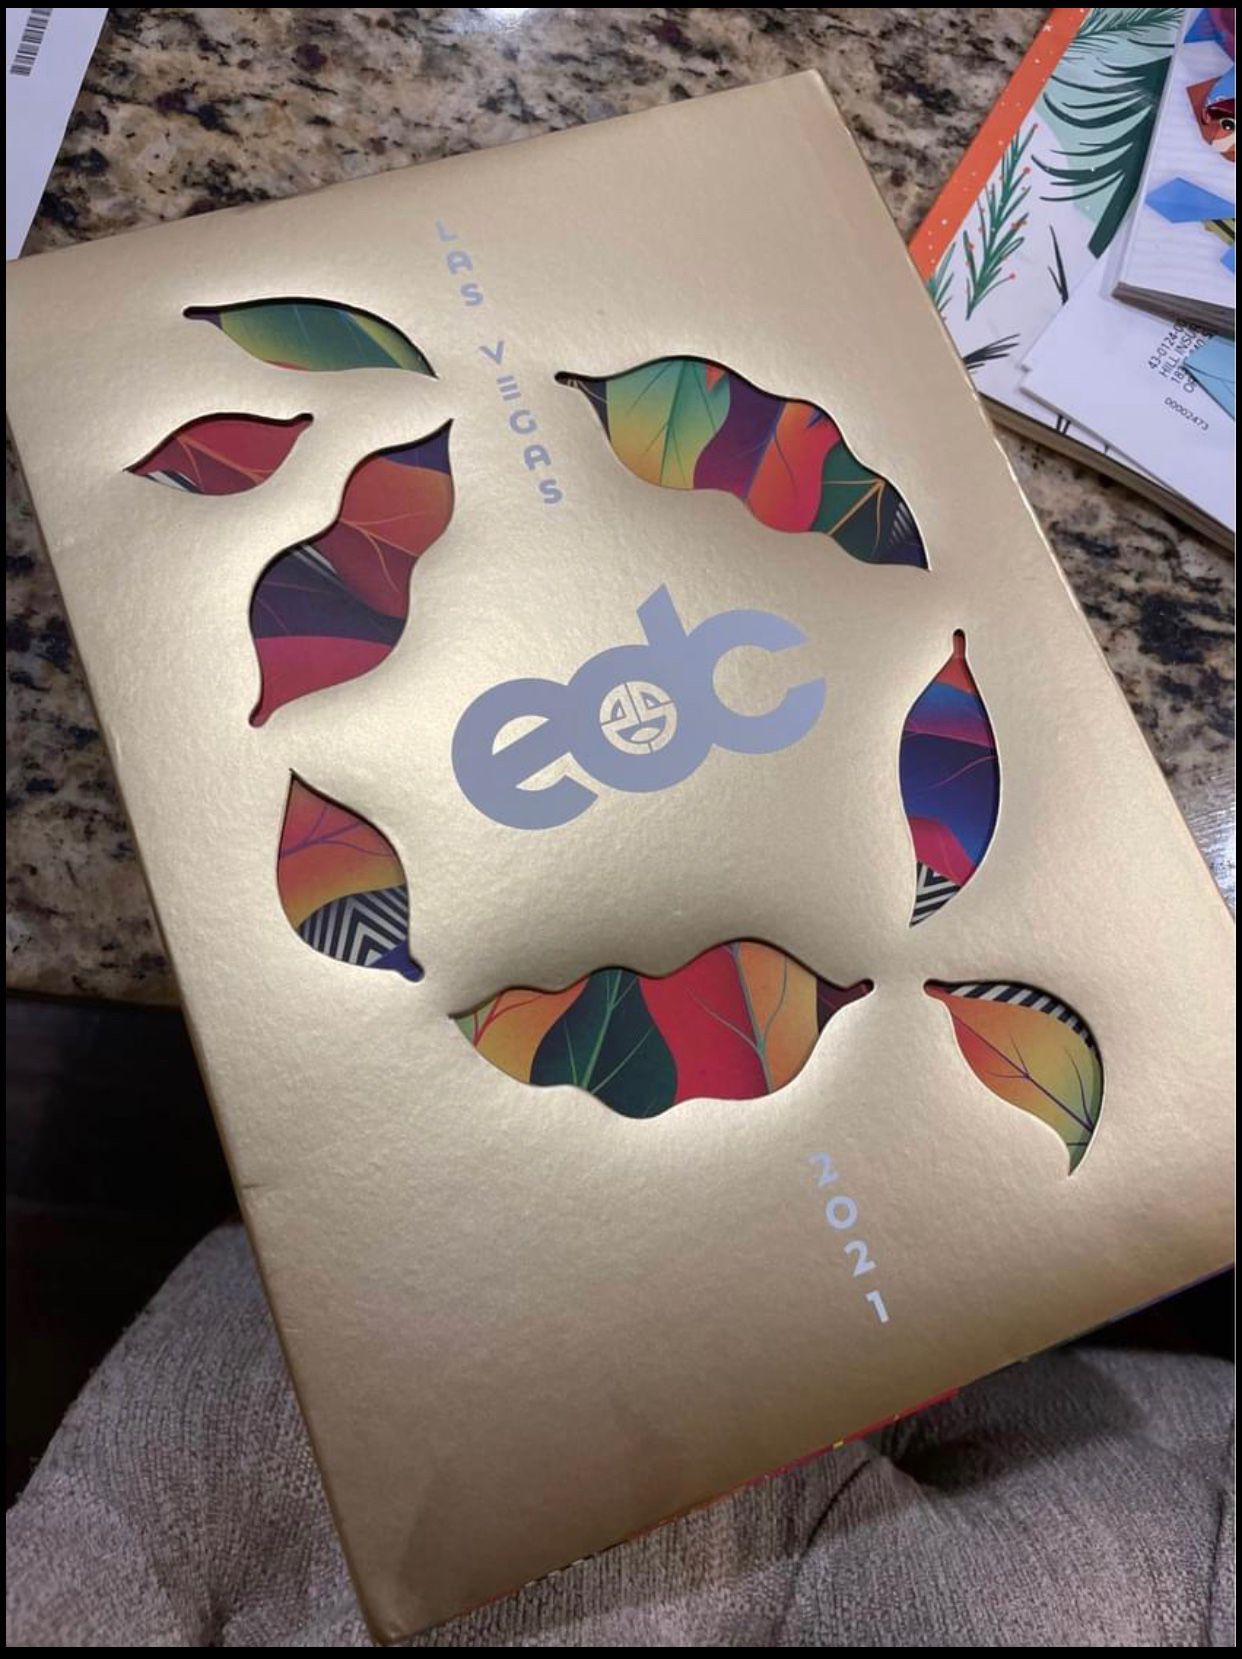 3 EDC VIP Passes Up For Sale